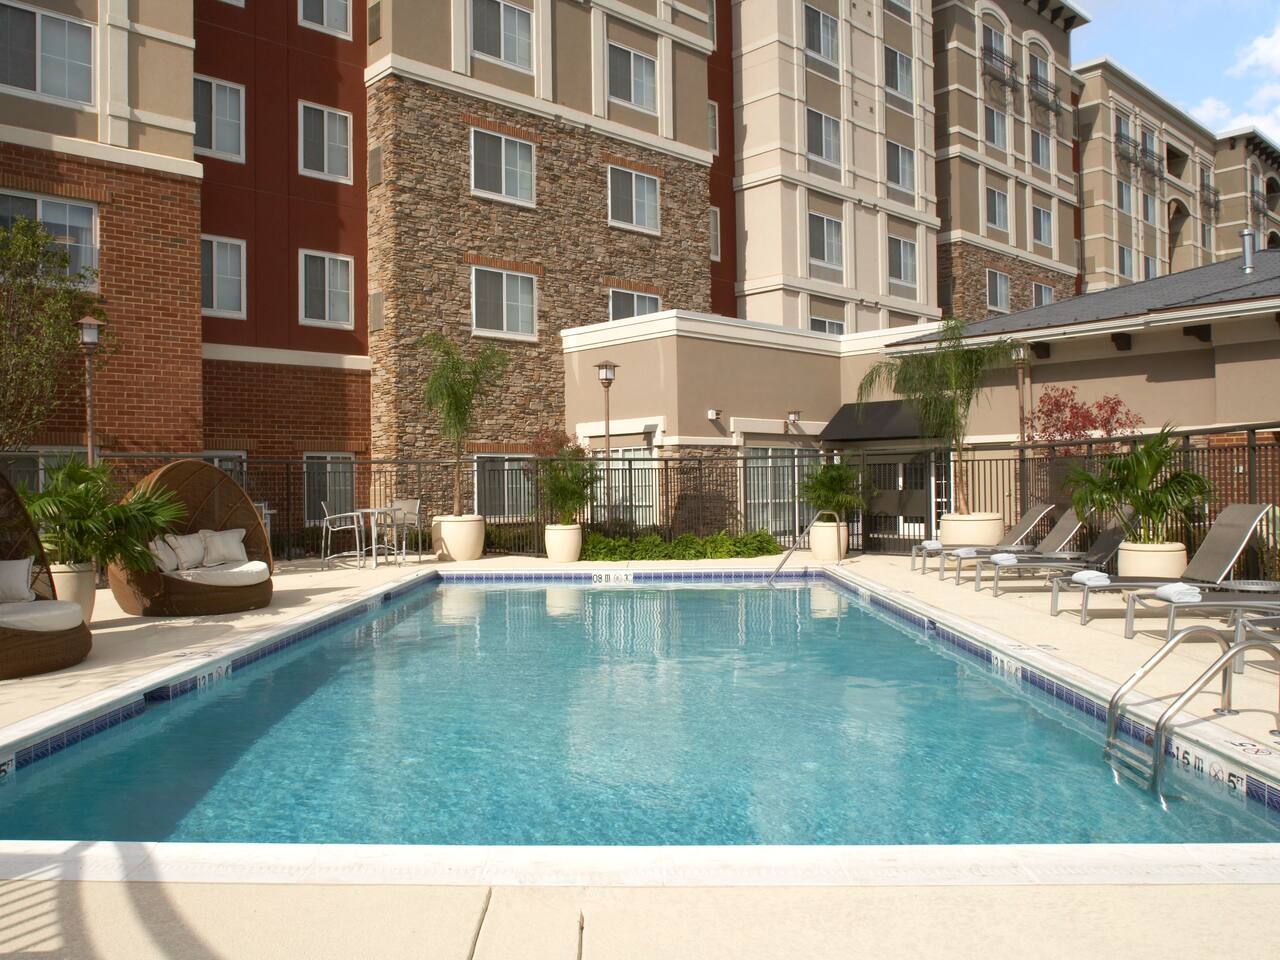 Outdoor pool with ADA lift and pool seating area at Hyatt House Sterling / Dulles Airport – North 